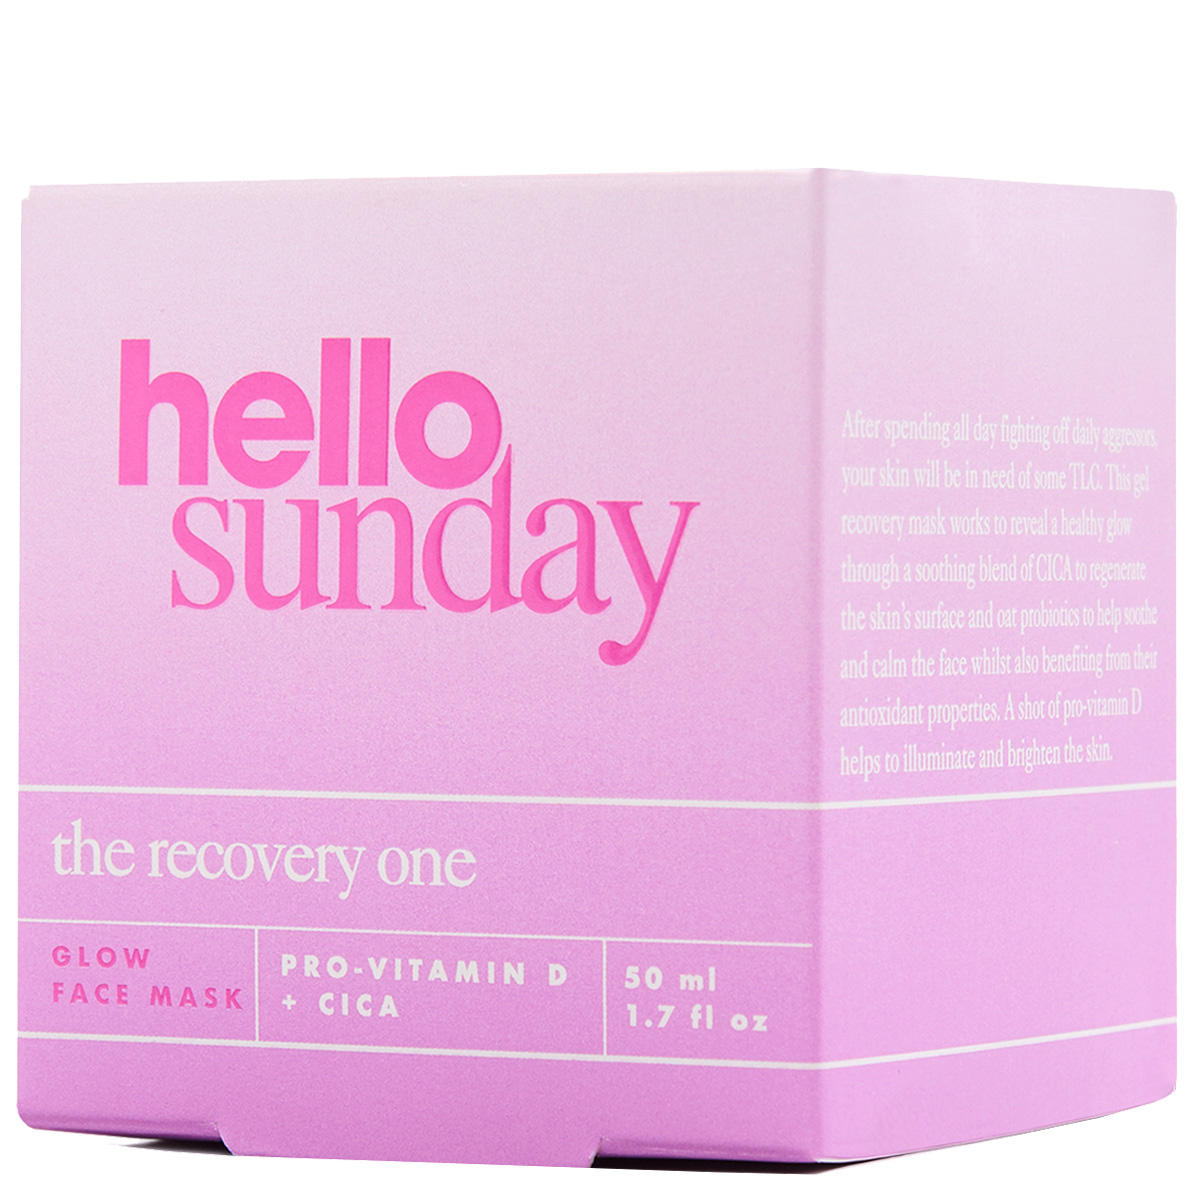 hello sunday the recovery one Glow face mask 50 ml - 5